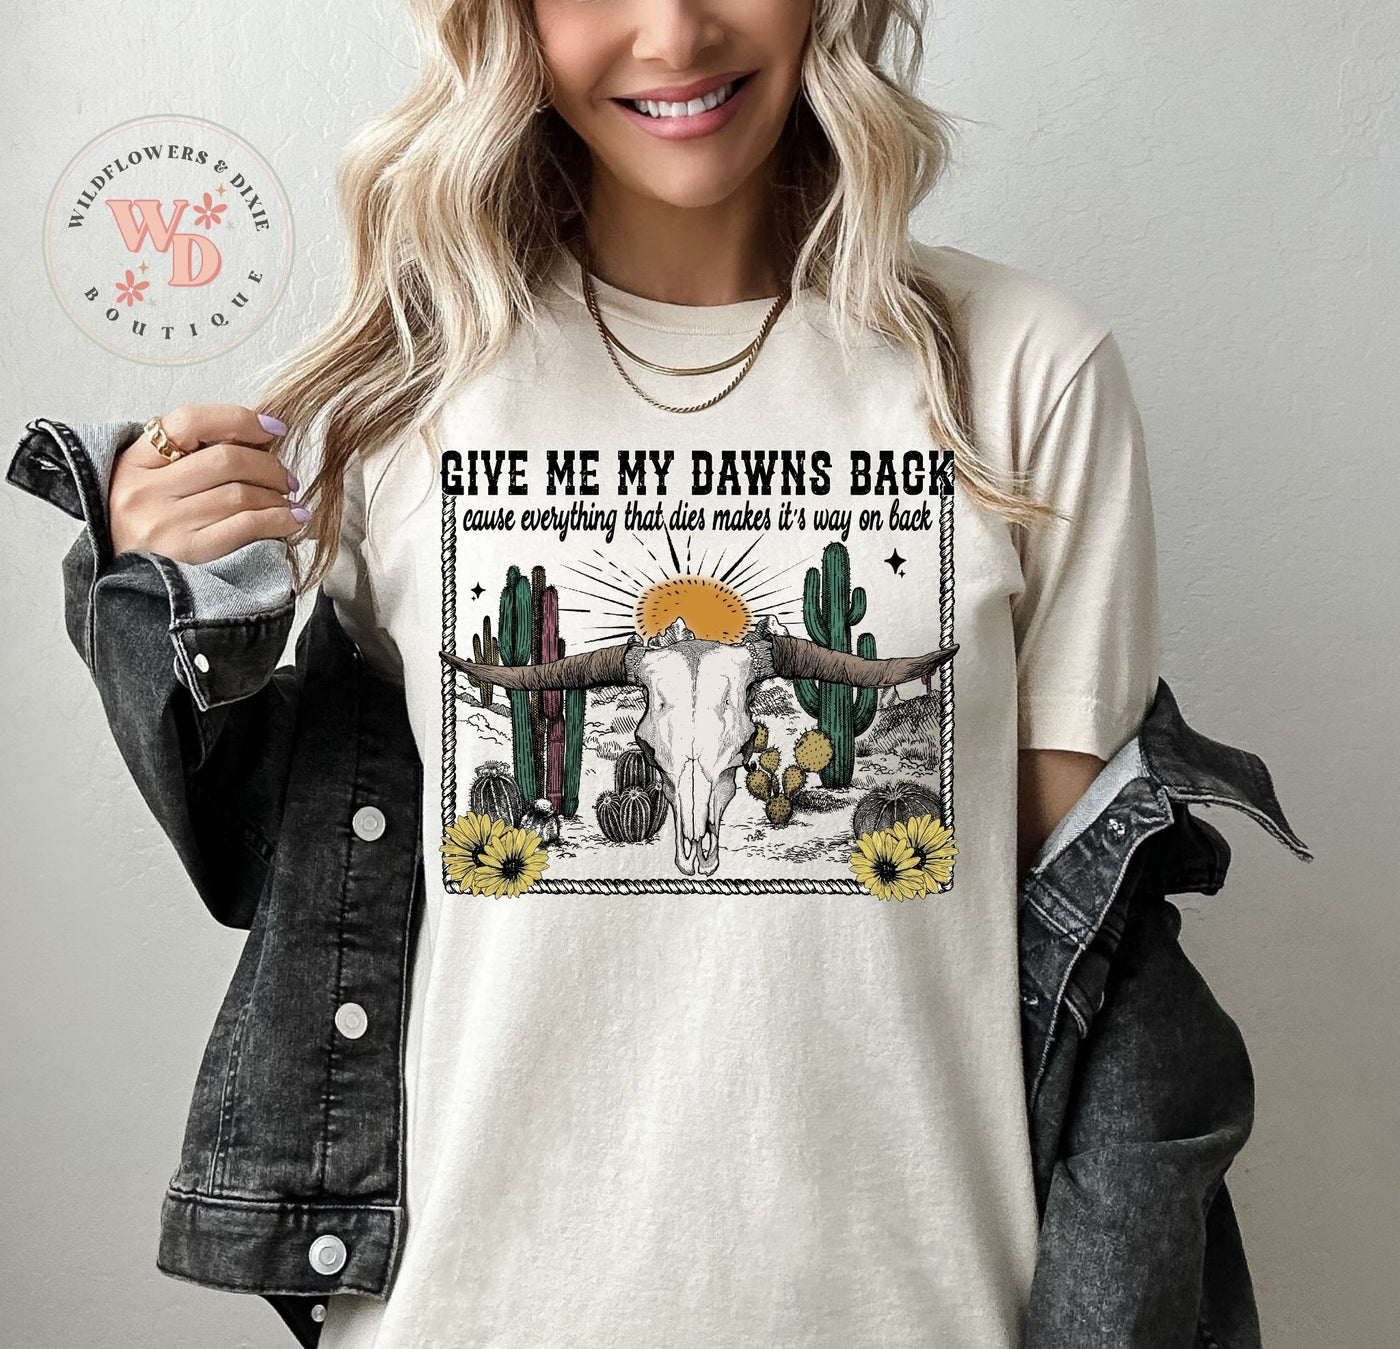 "Give Me My Dawn Back" Front + Back T-shirt (shown on "Natural")